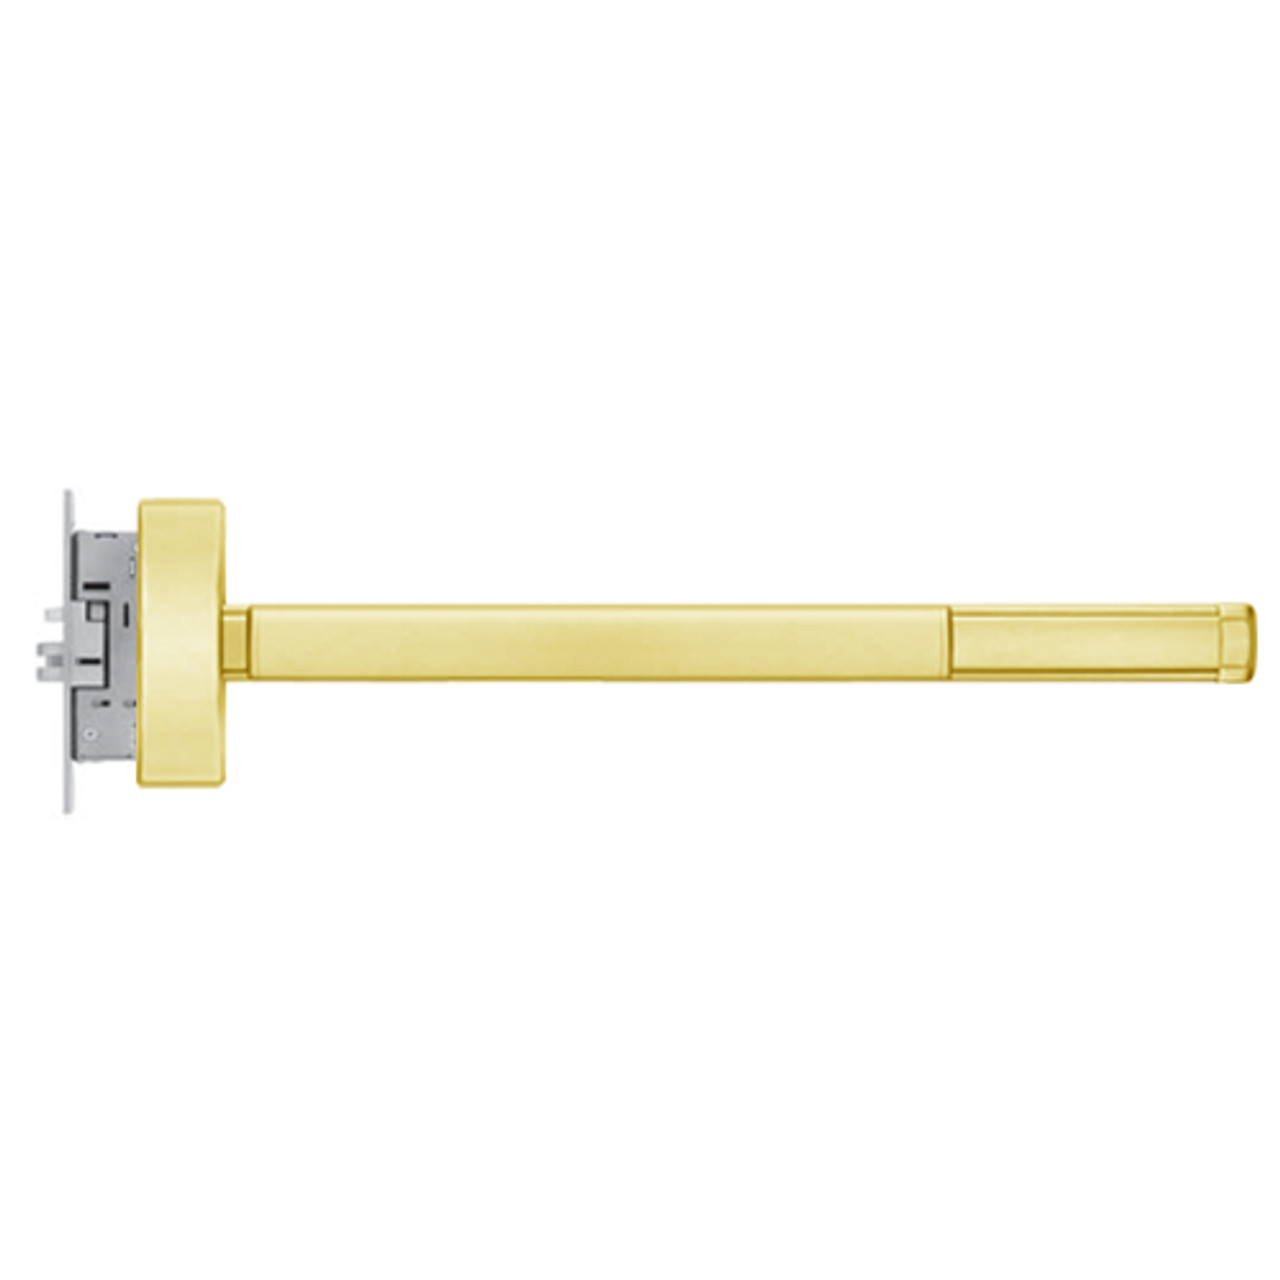 FL2308-RHR-605-48 PHI 2300 Series Fire Rated Apex Mortise Exit Device Prepped for Key Controls Lever/Knob in Bright Brass Finish